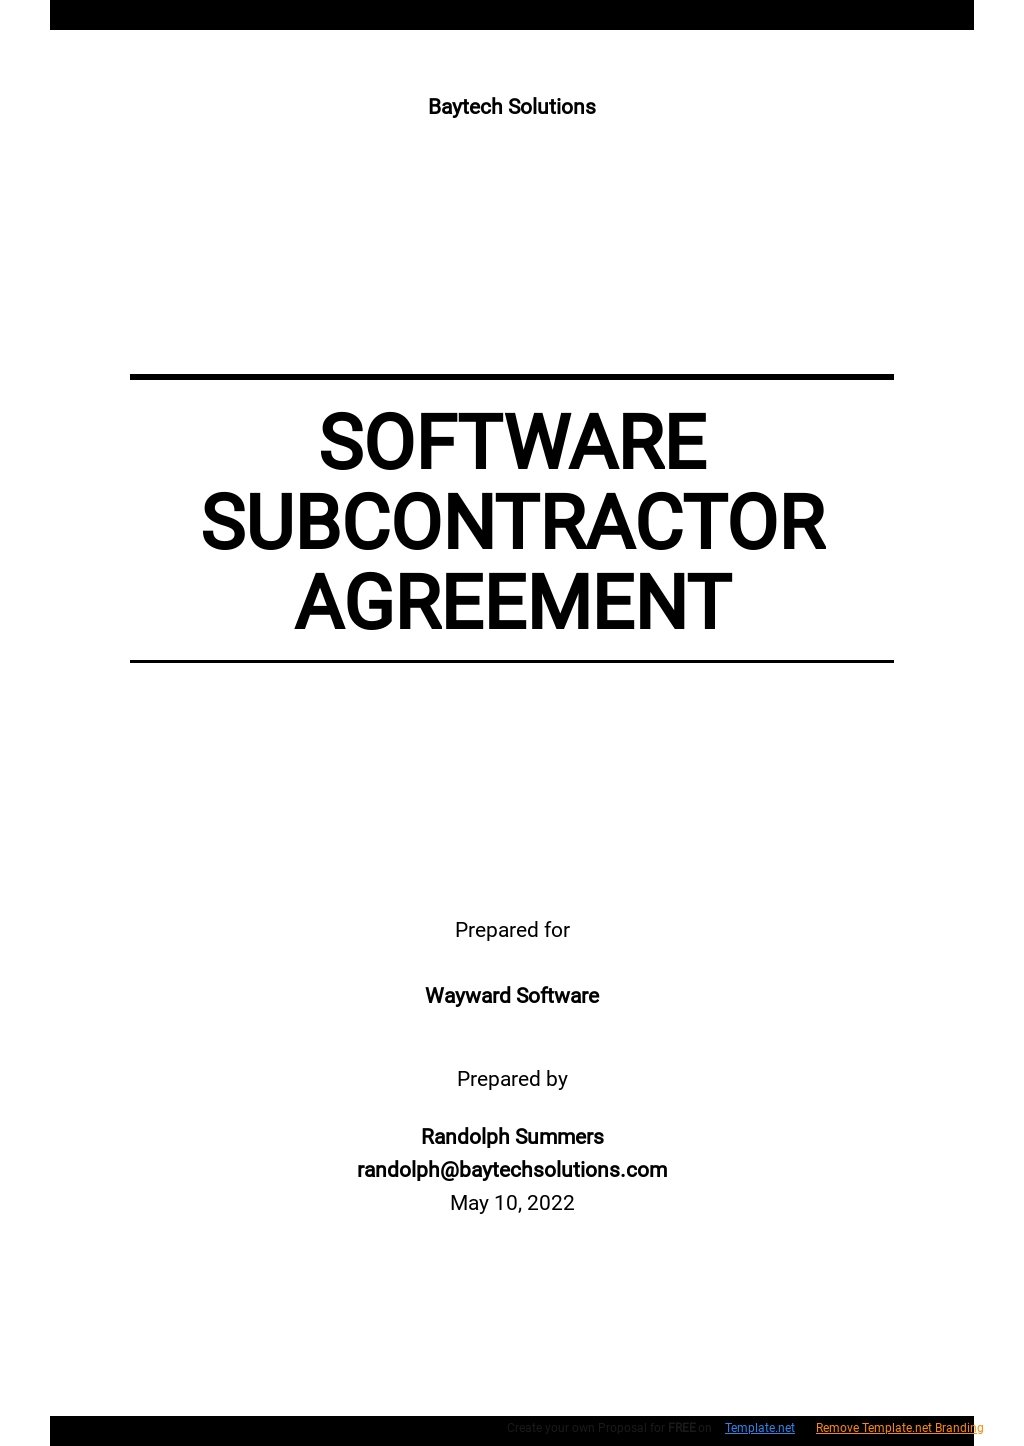 Software Subcontractor Agreement Template.jpe